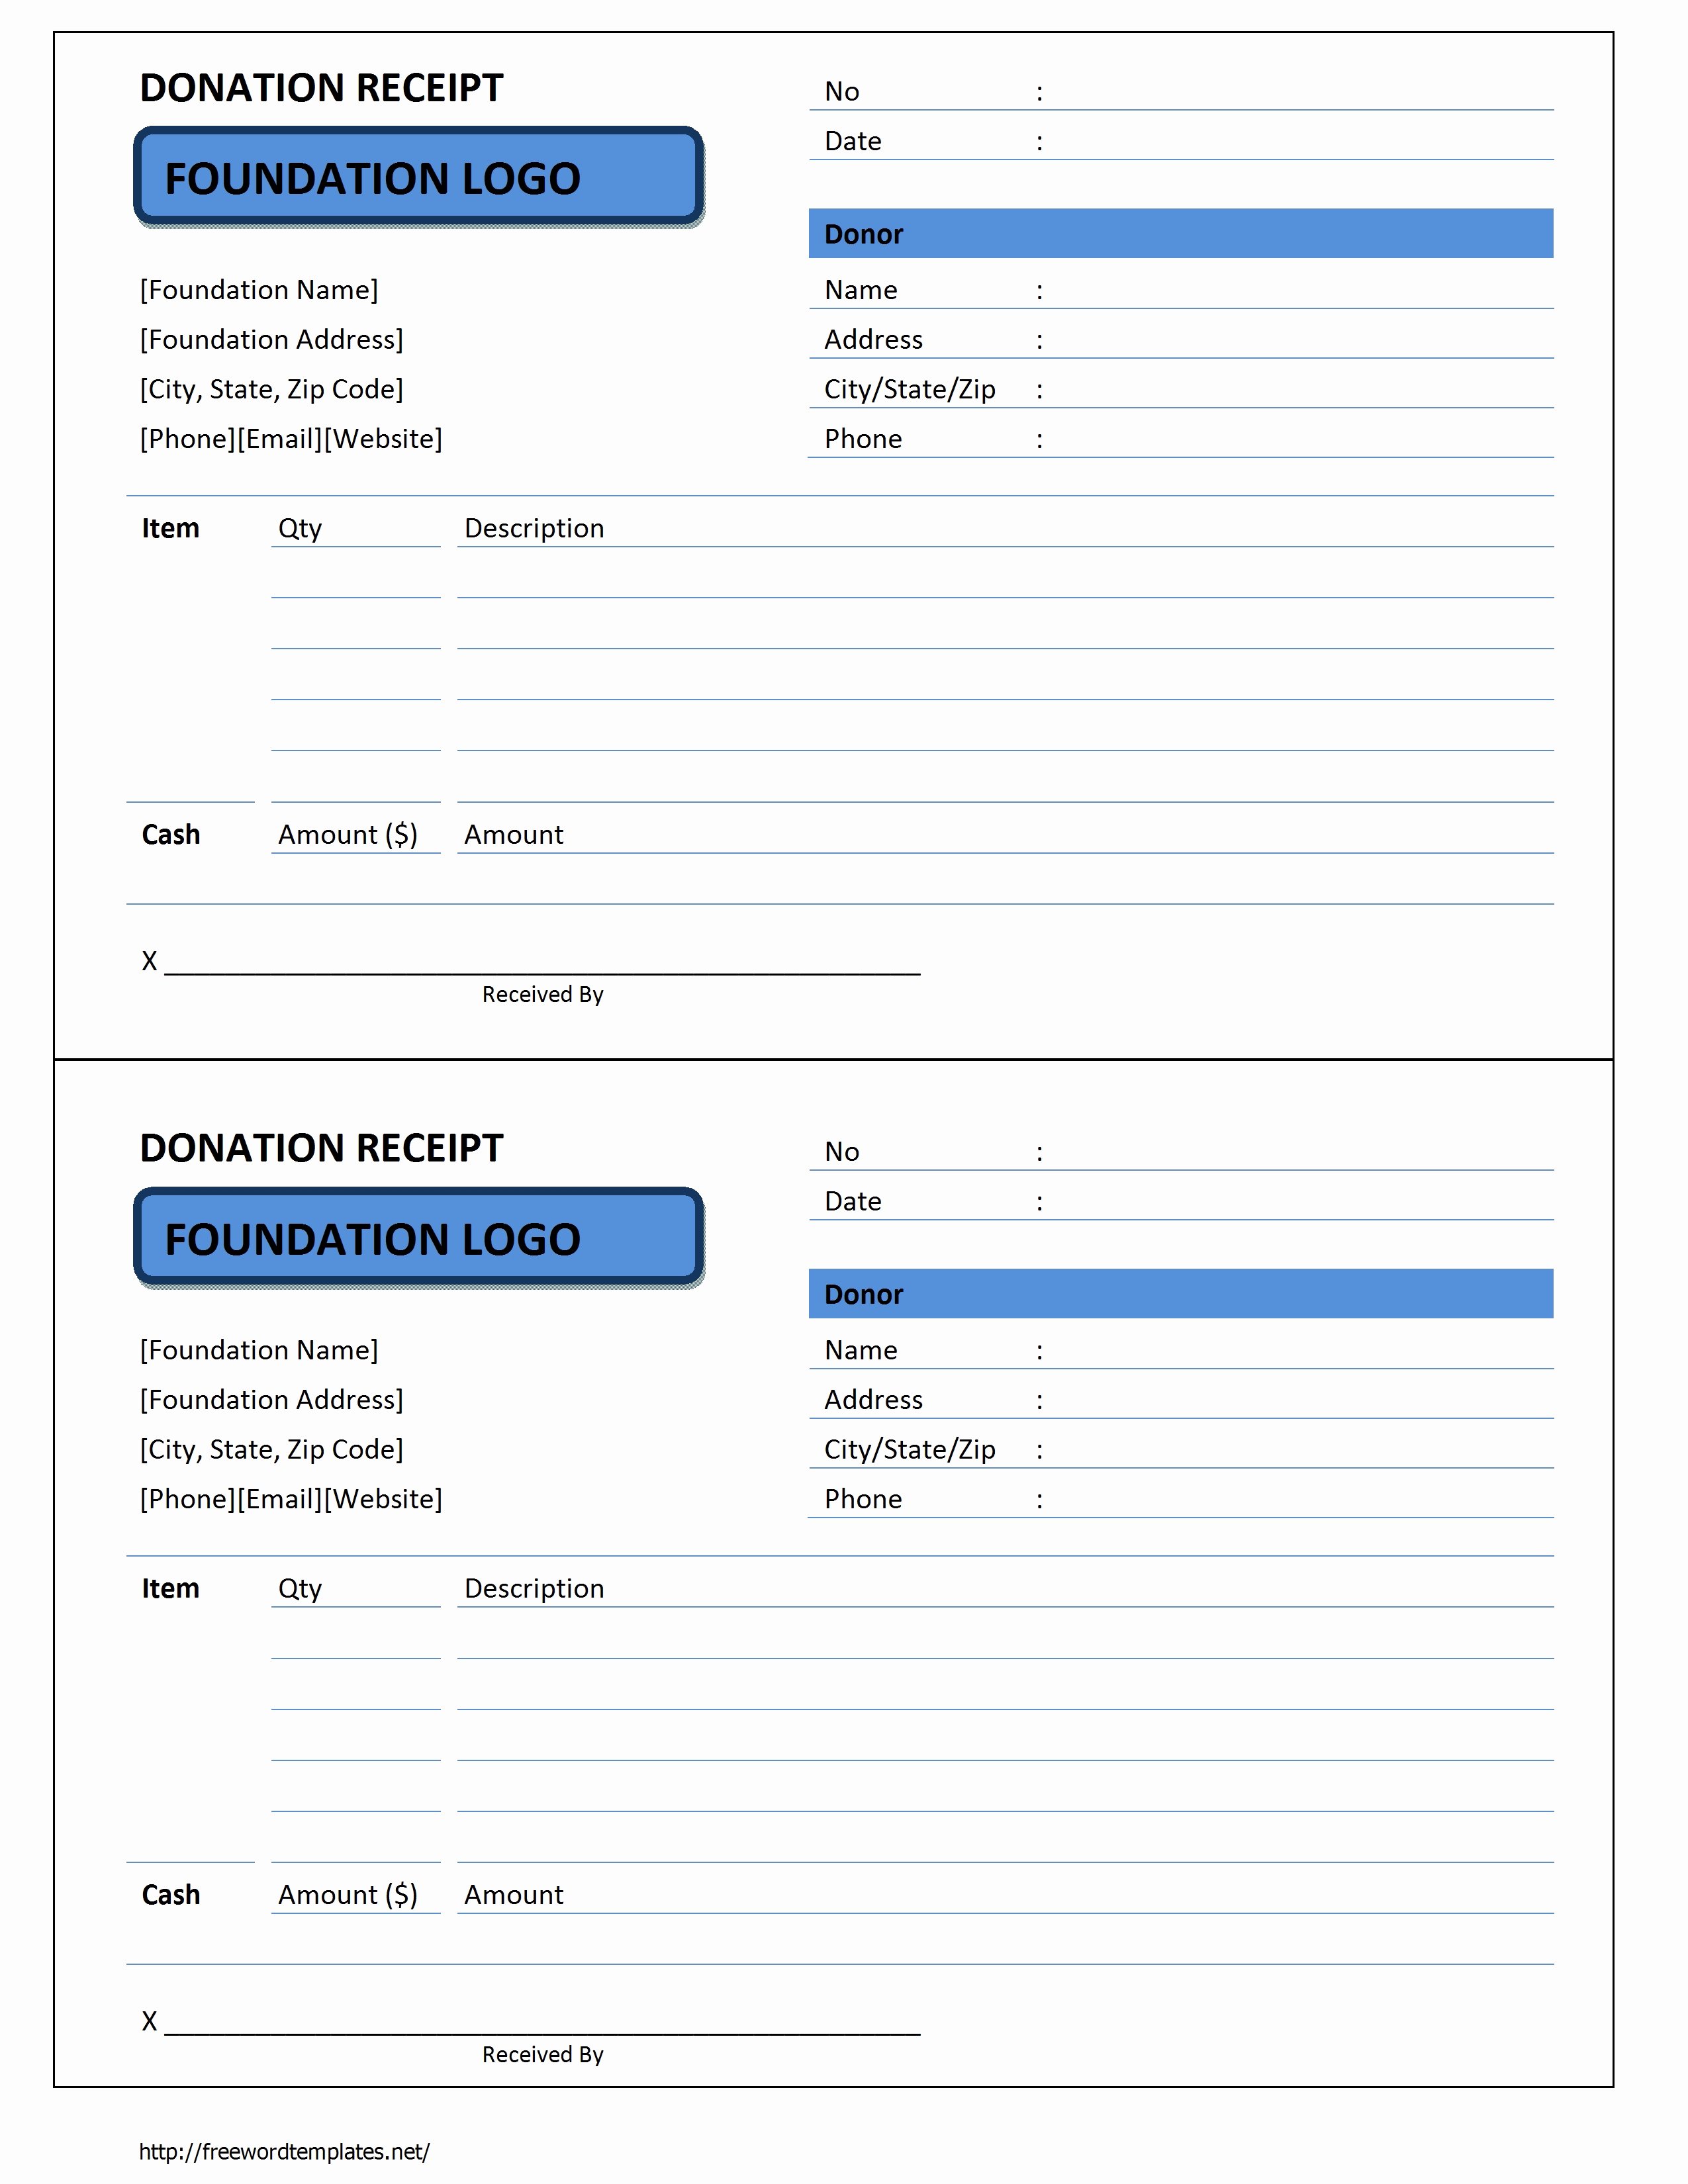 Tax Donation form Template Inspirational 4 Tax Donation Receipt Templates Excel Xlts